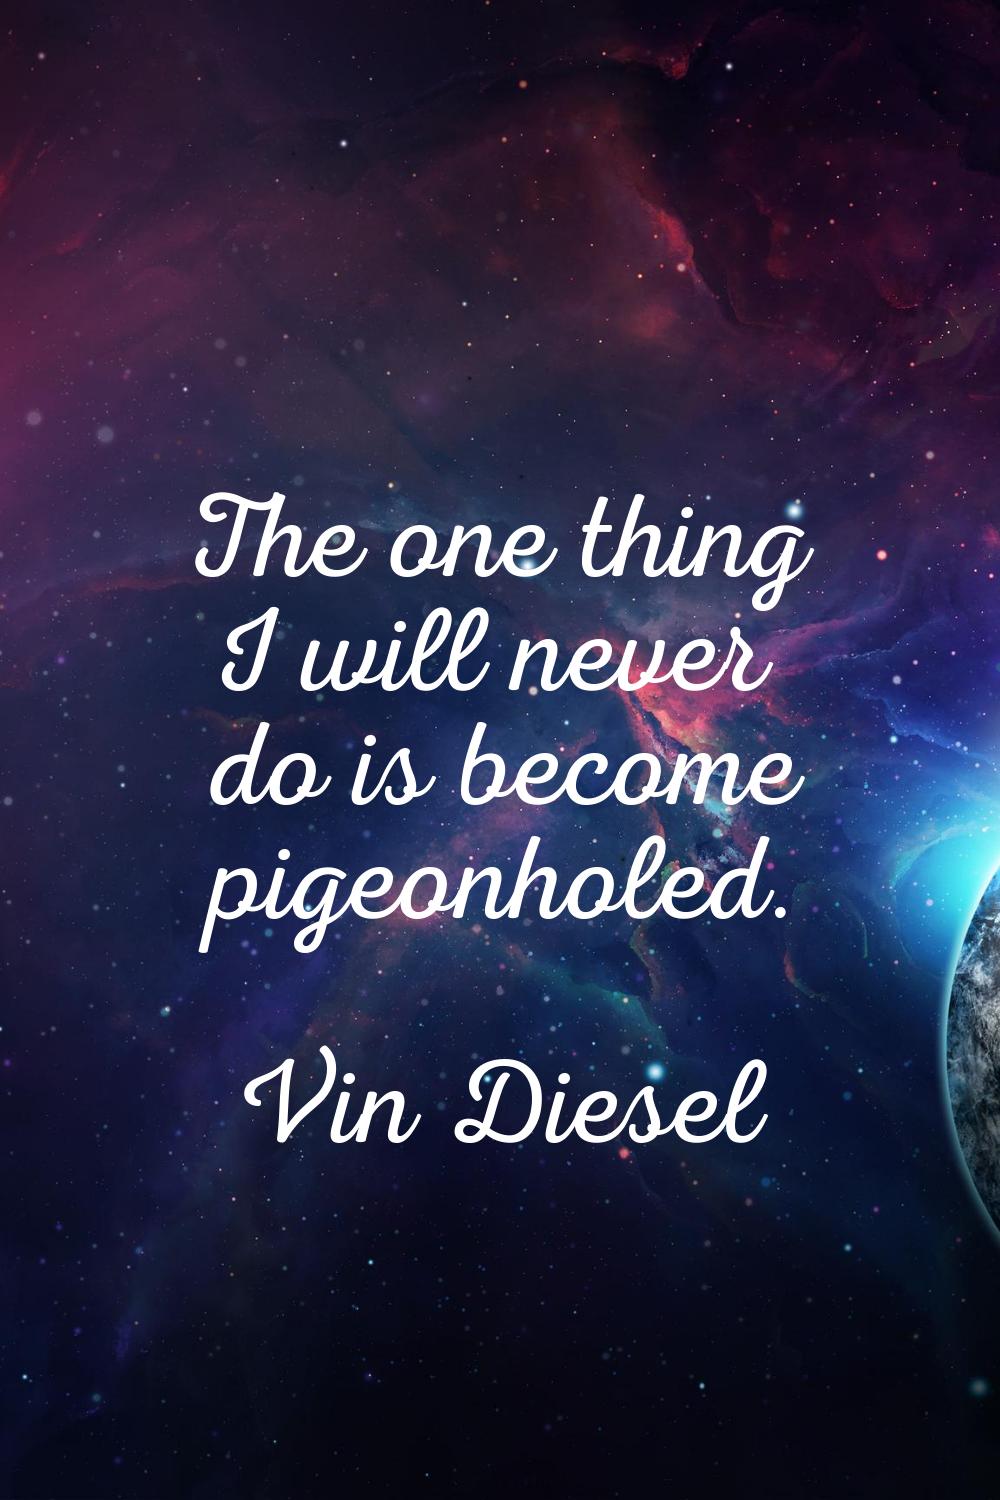 The one thing I will never do is become pigeonholed.